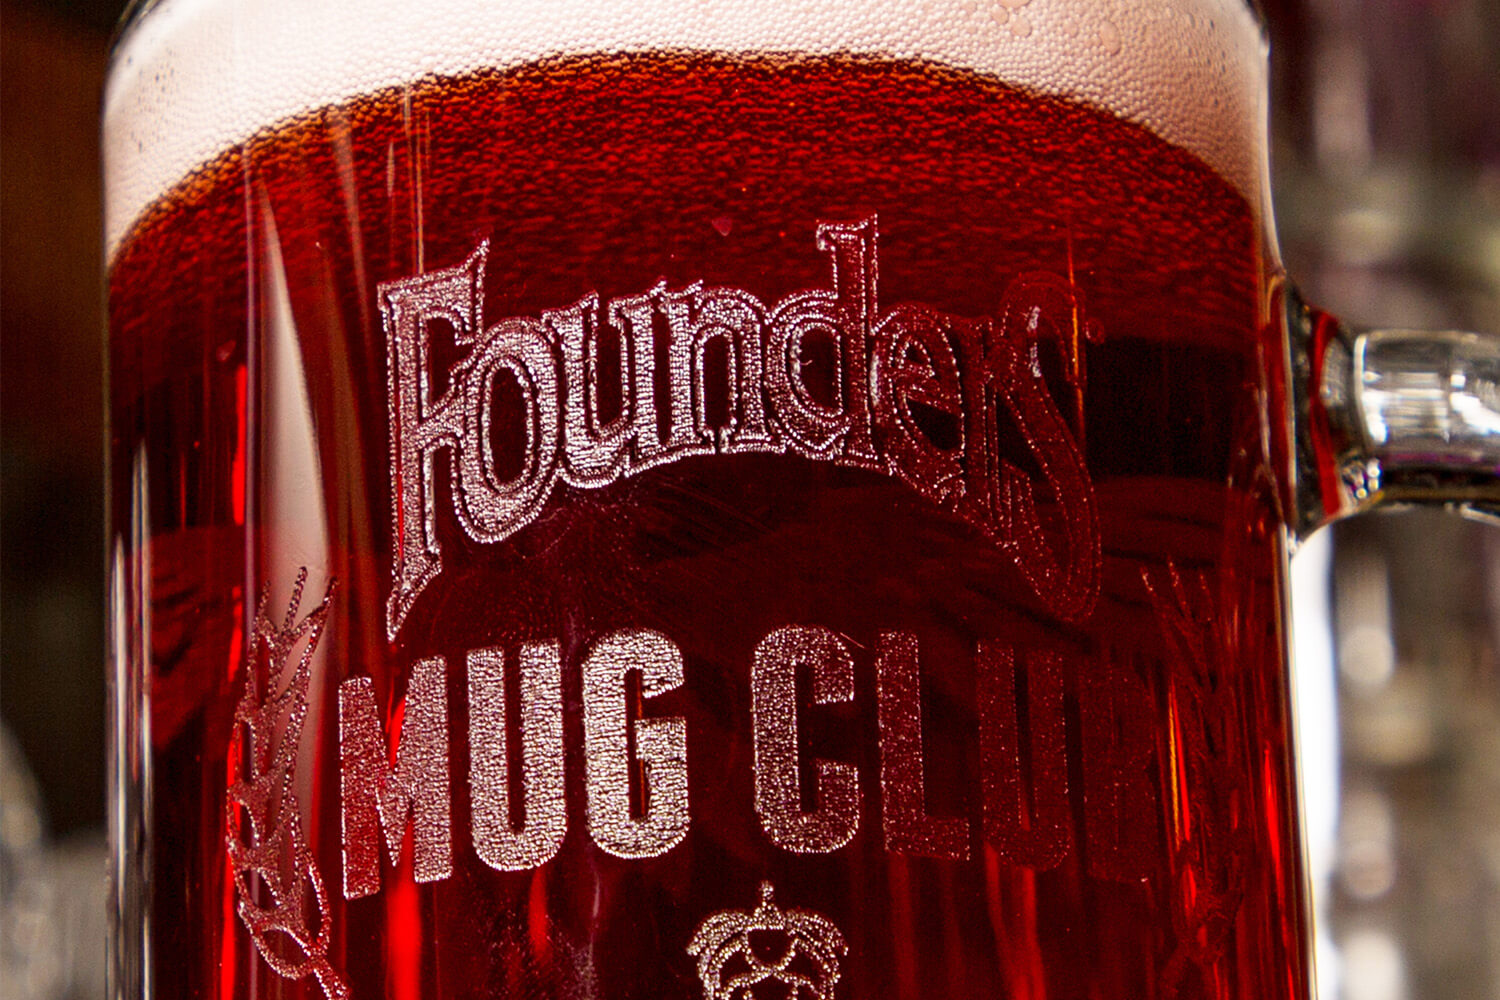 Beer mug full of beer with Founders Mug Club etched on the side